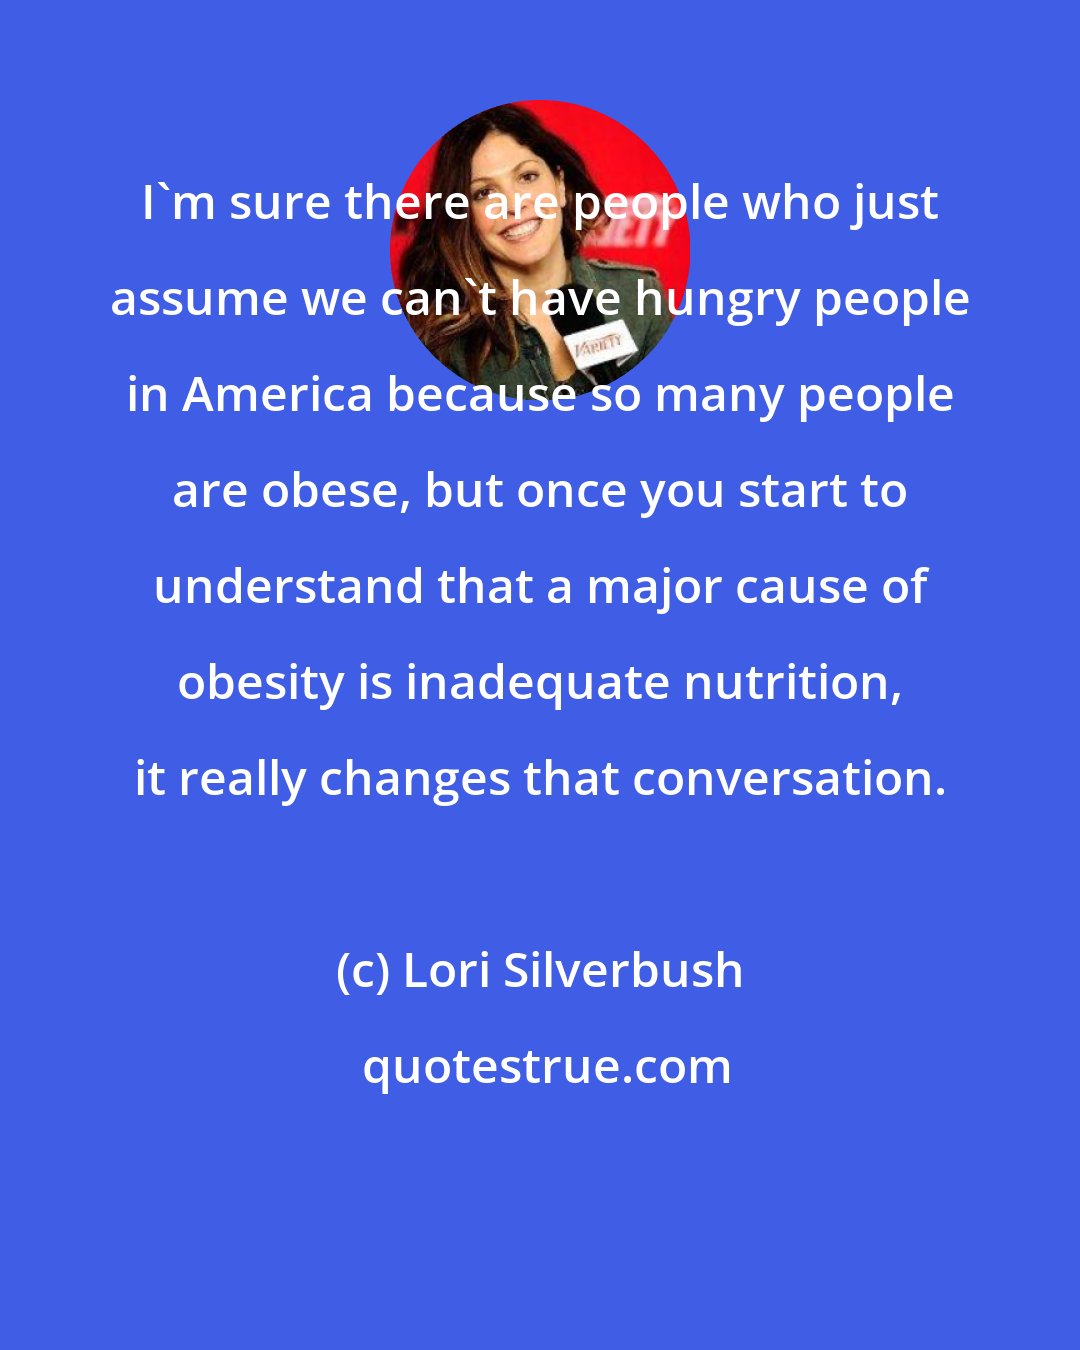 Lori Silverbush: I'm sure there are people who just assume we can't have hungry people in America because so many people are obese, but once you start to understand that a major cause of obesity is inadequate nutrition, it really changes that conversation.